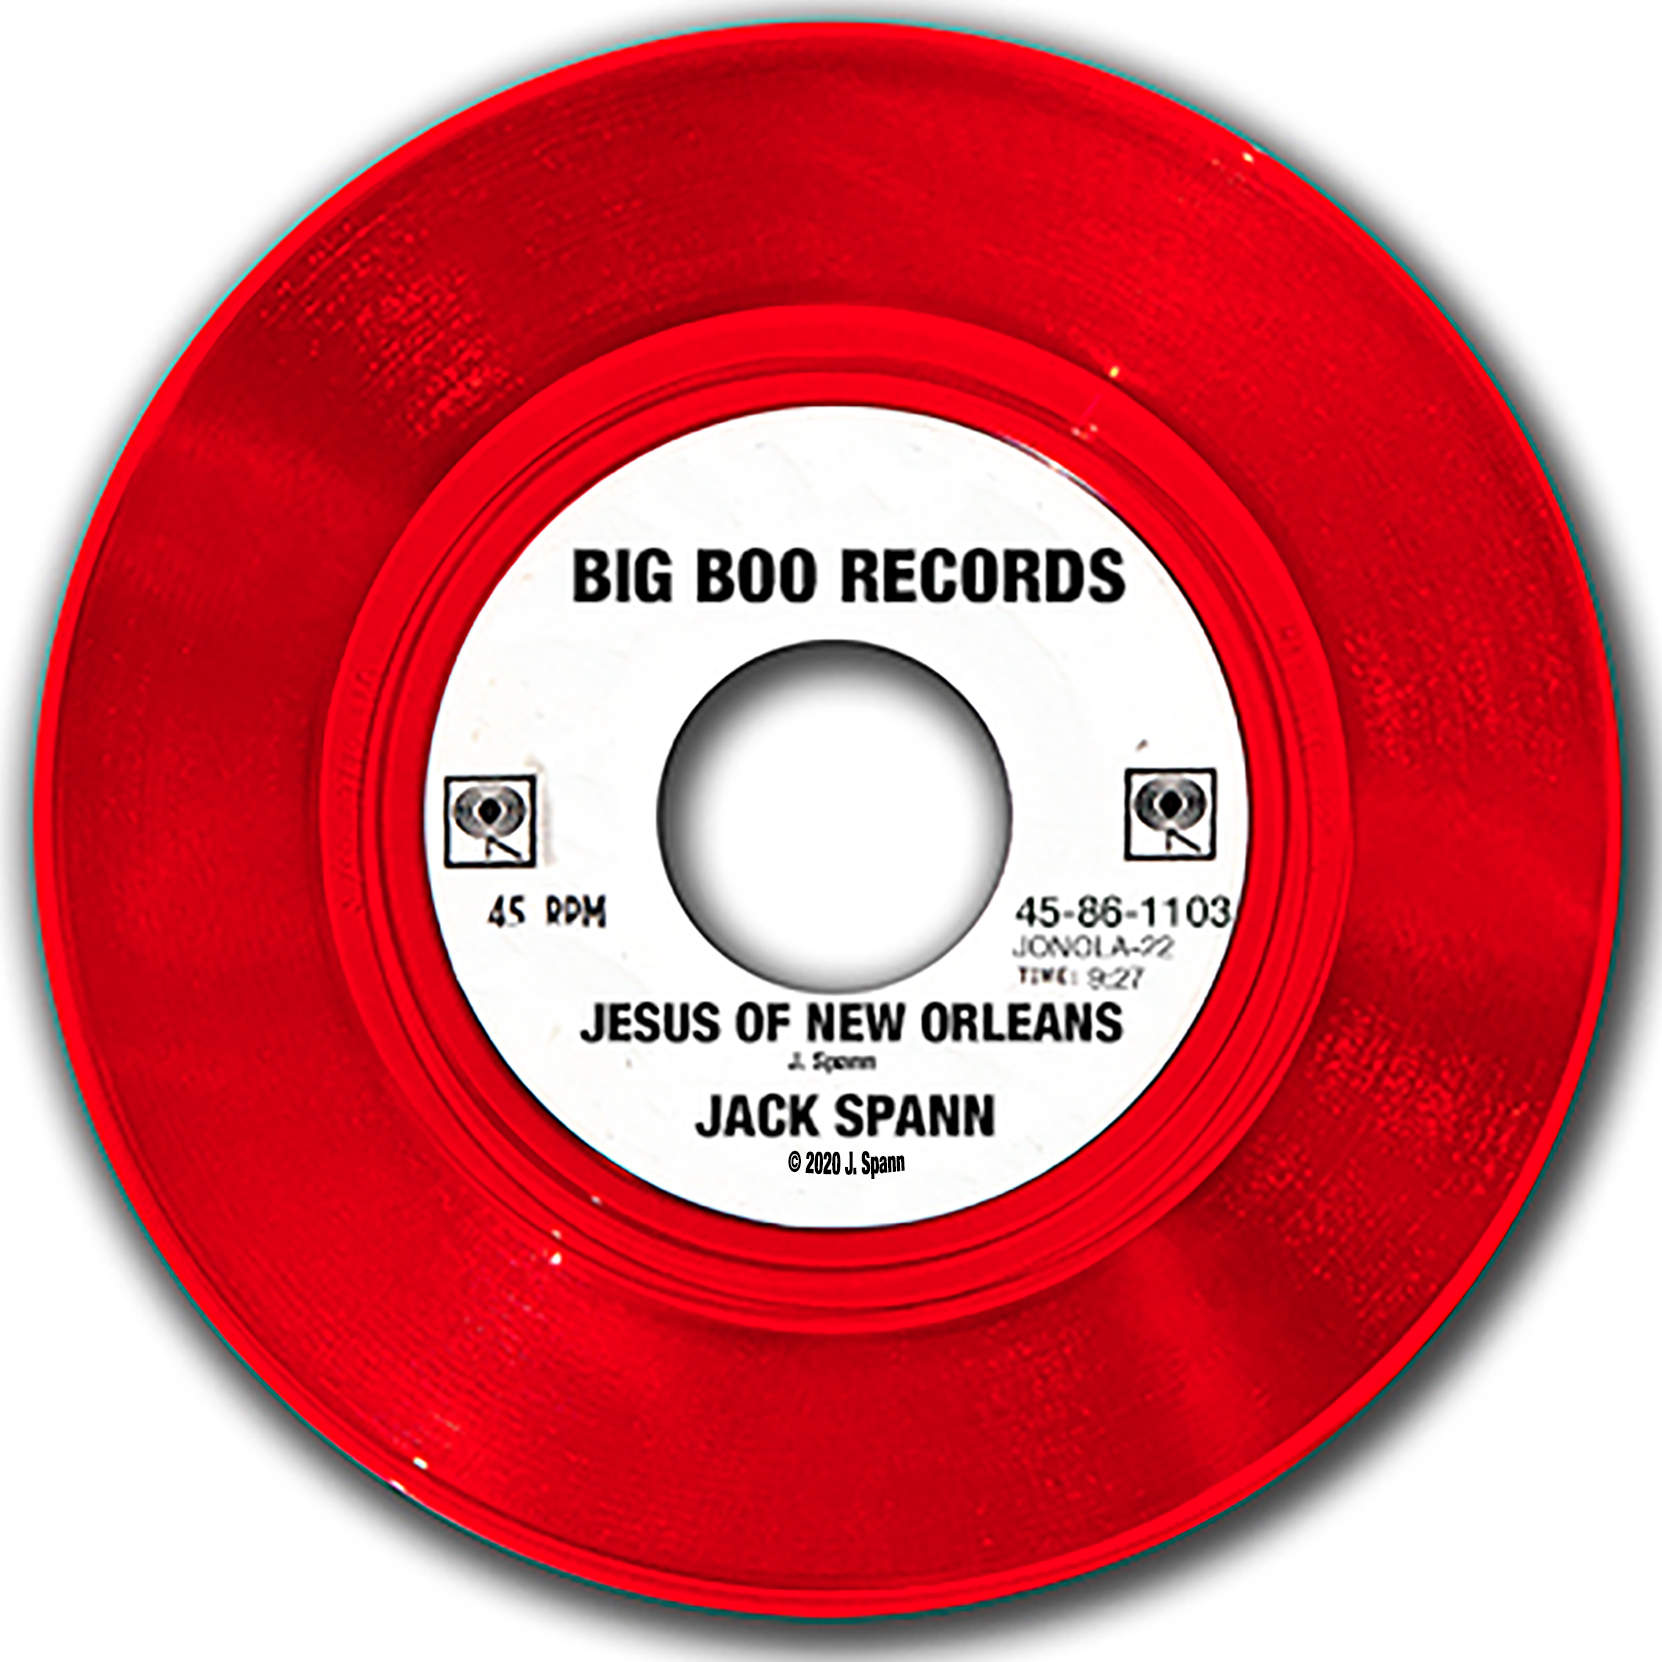 Piano Man - Jack Spann to Release Jesus of New Orleans